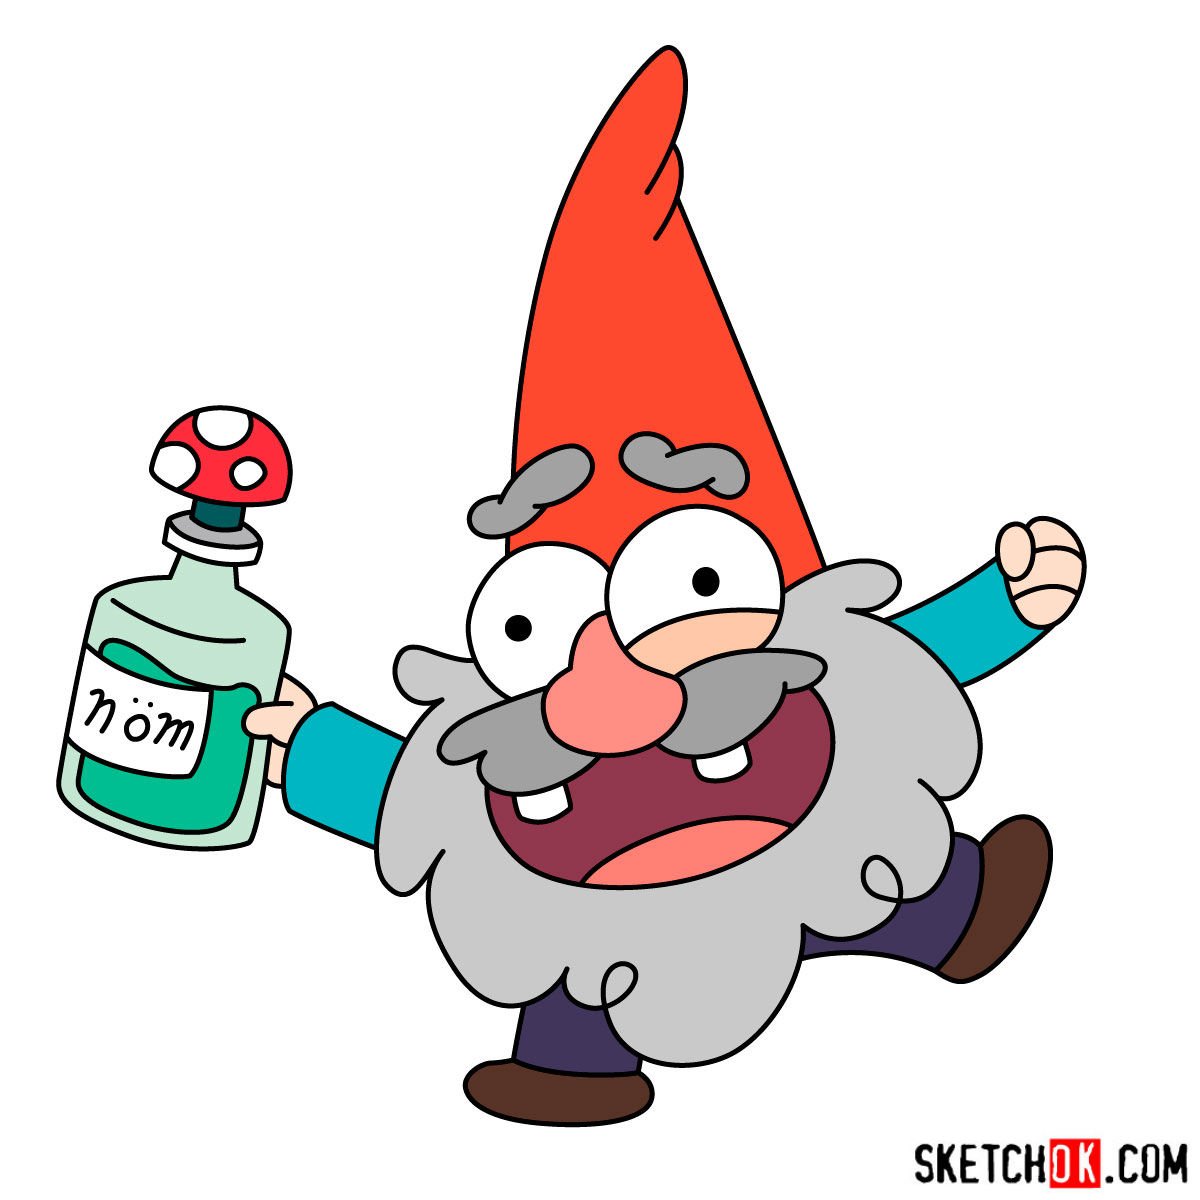 How to draw Gnome from Gravity Falls